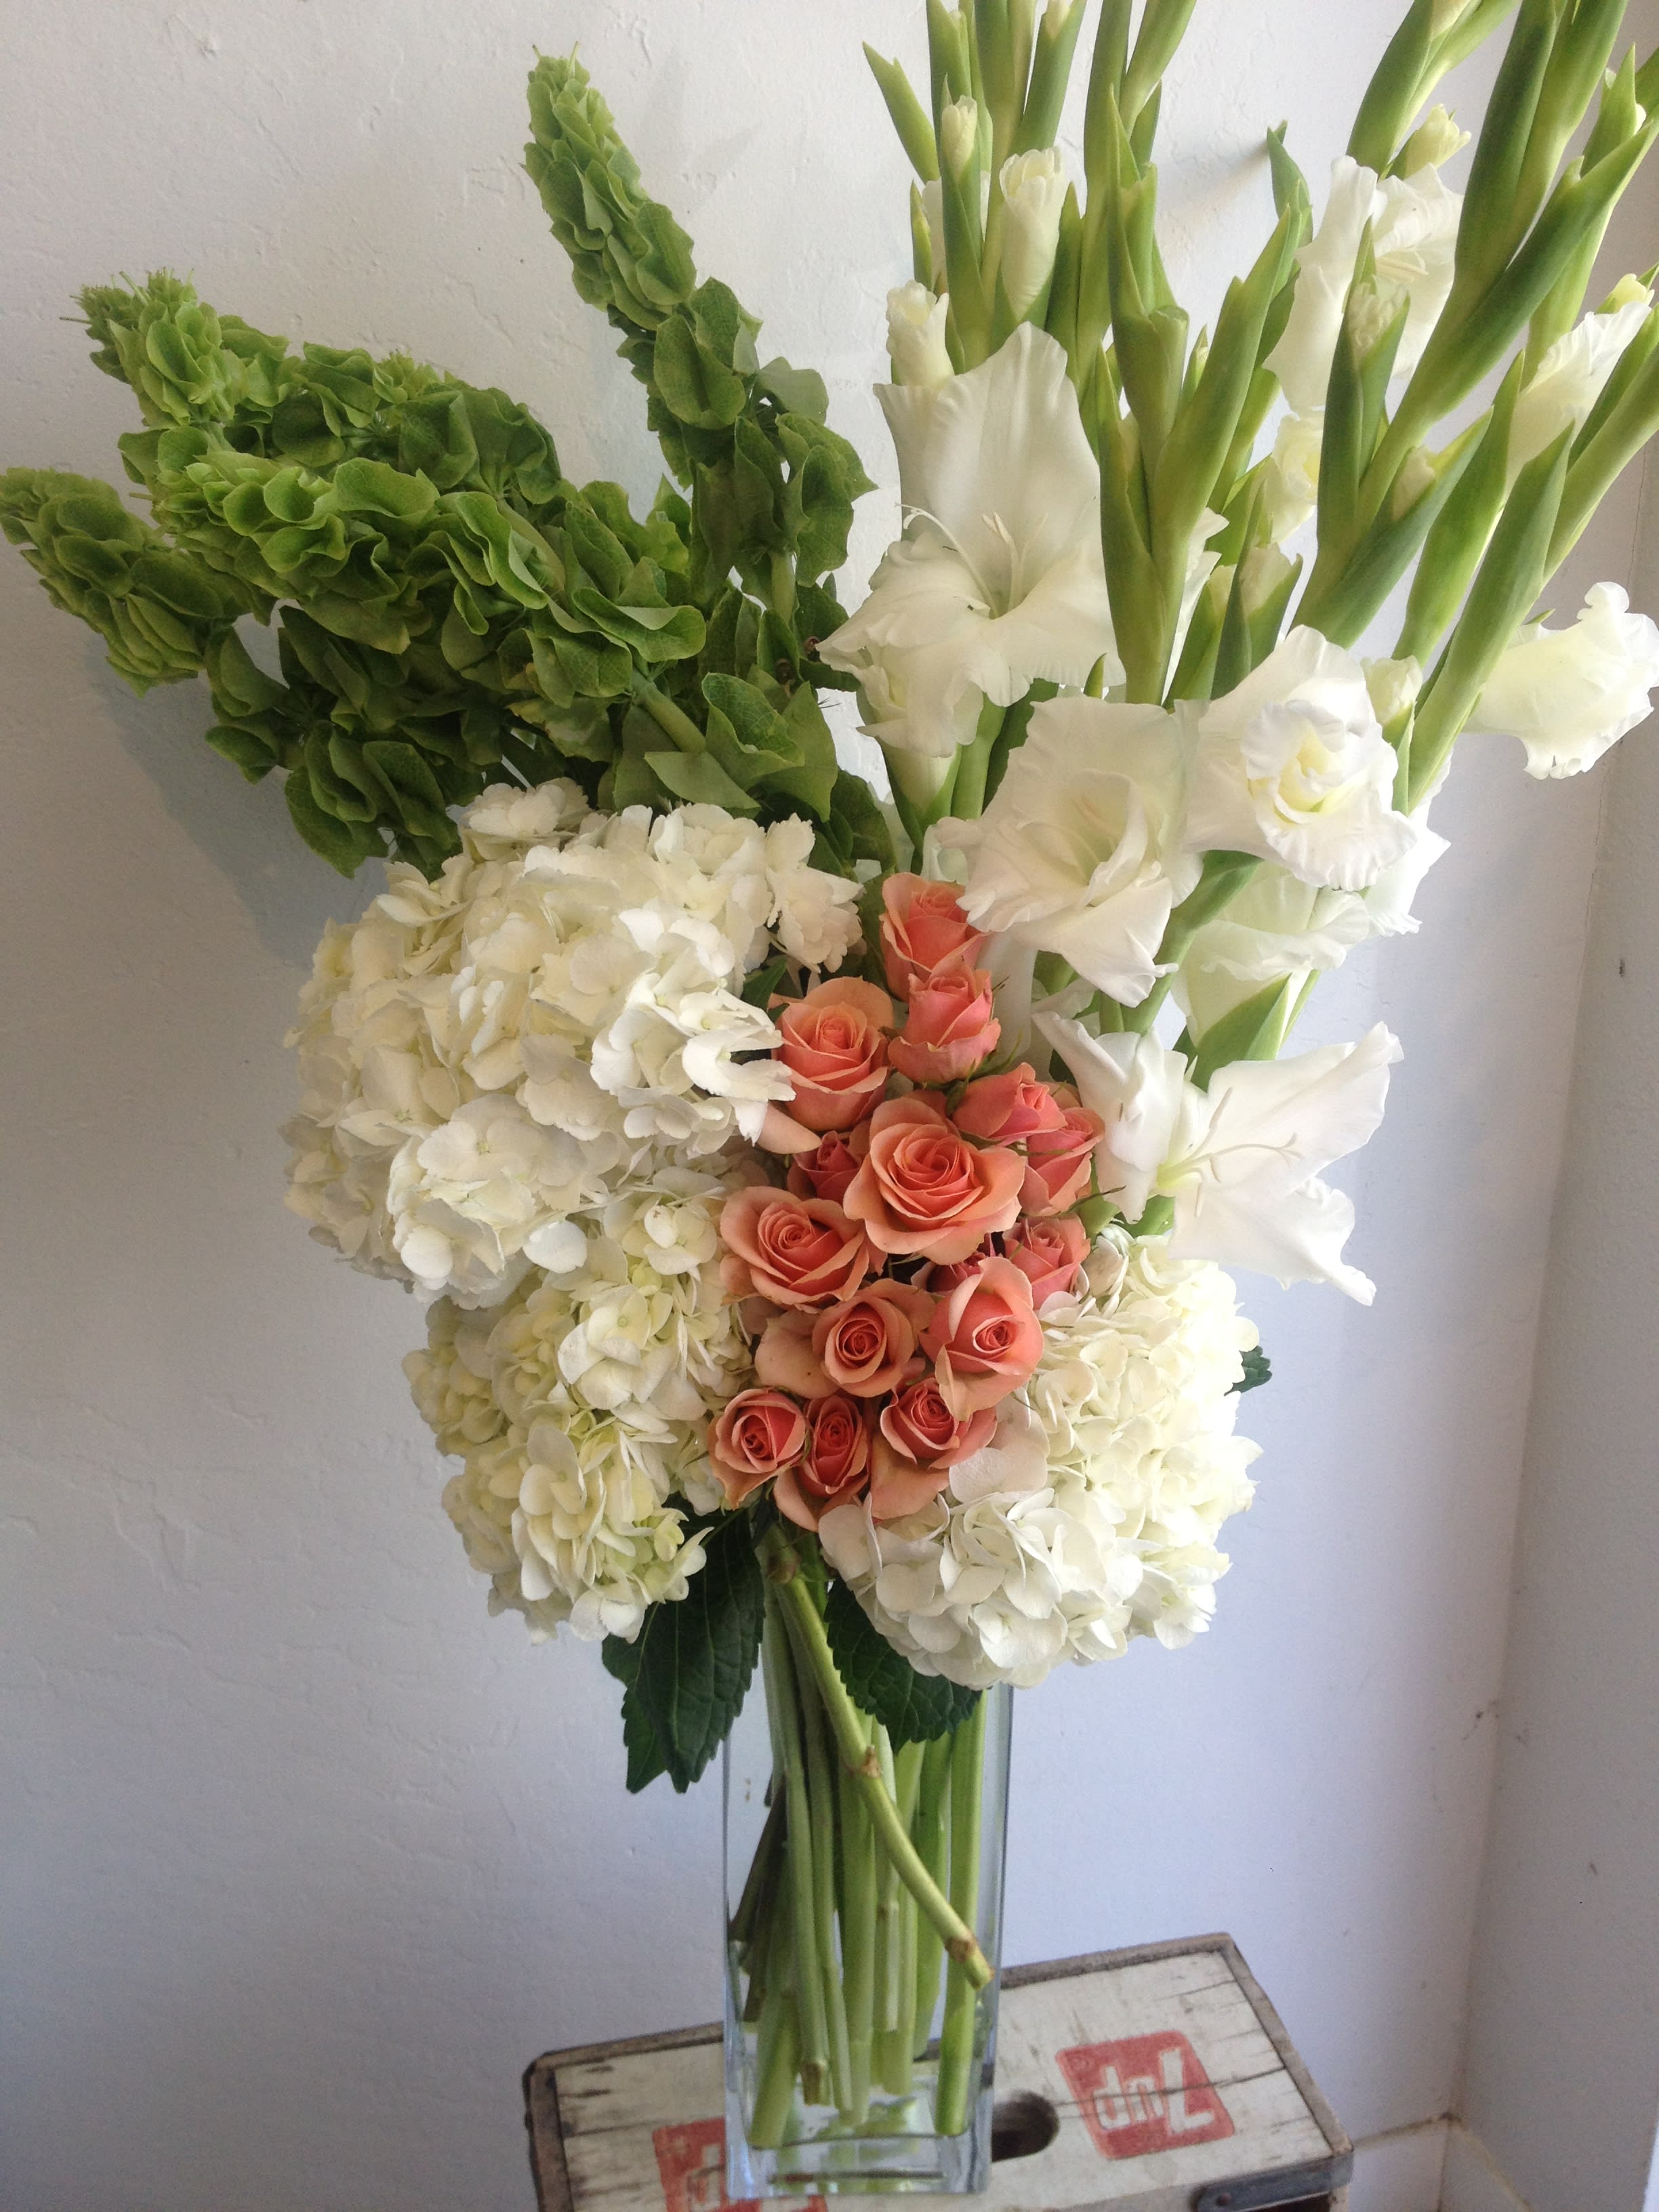 Eloise - A tasteful and modern design of  blooming white gladiolus, green bells of Ireland,  fluffy white hydrangea and peach spray roses.